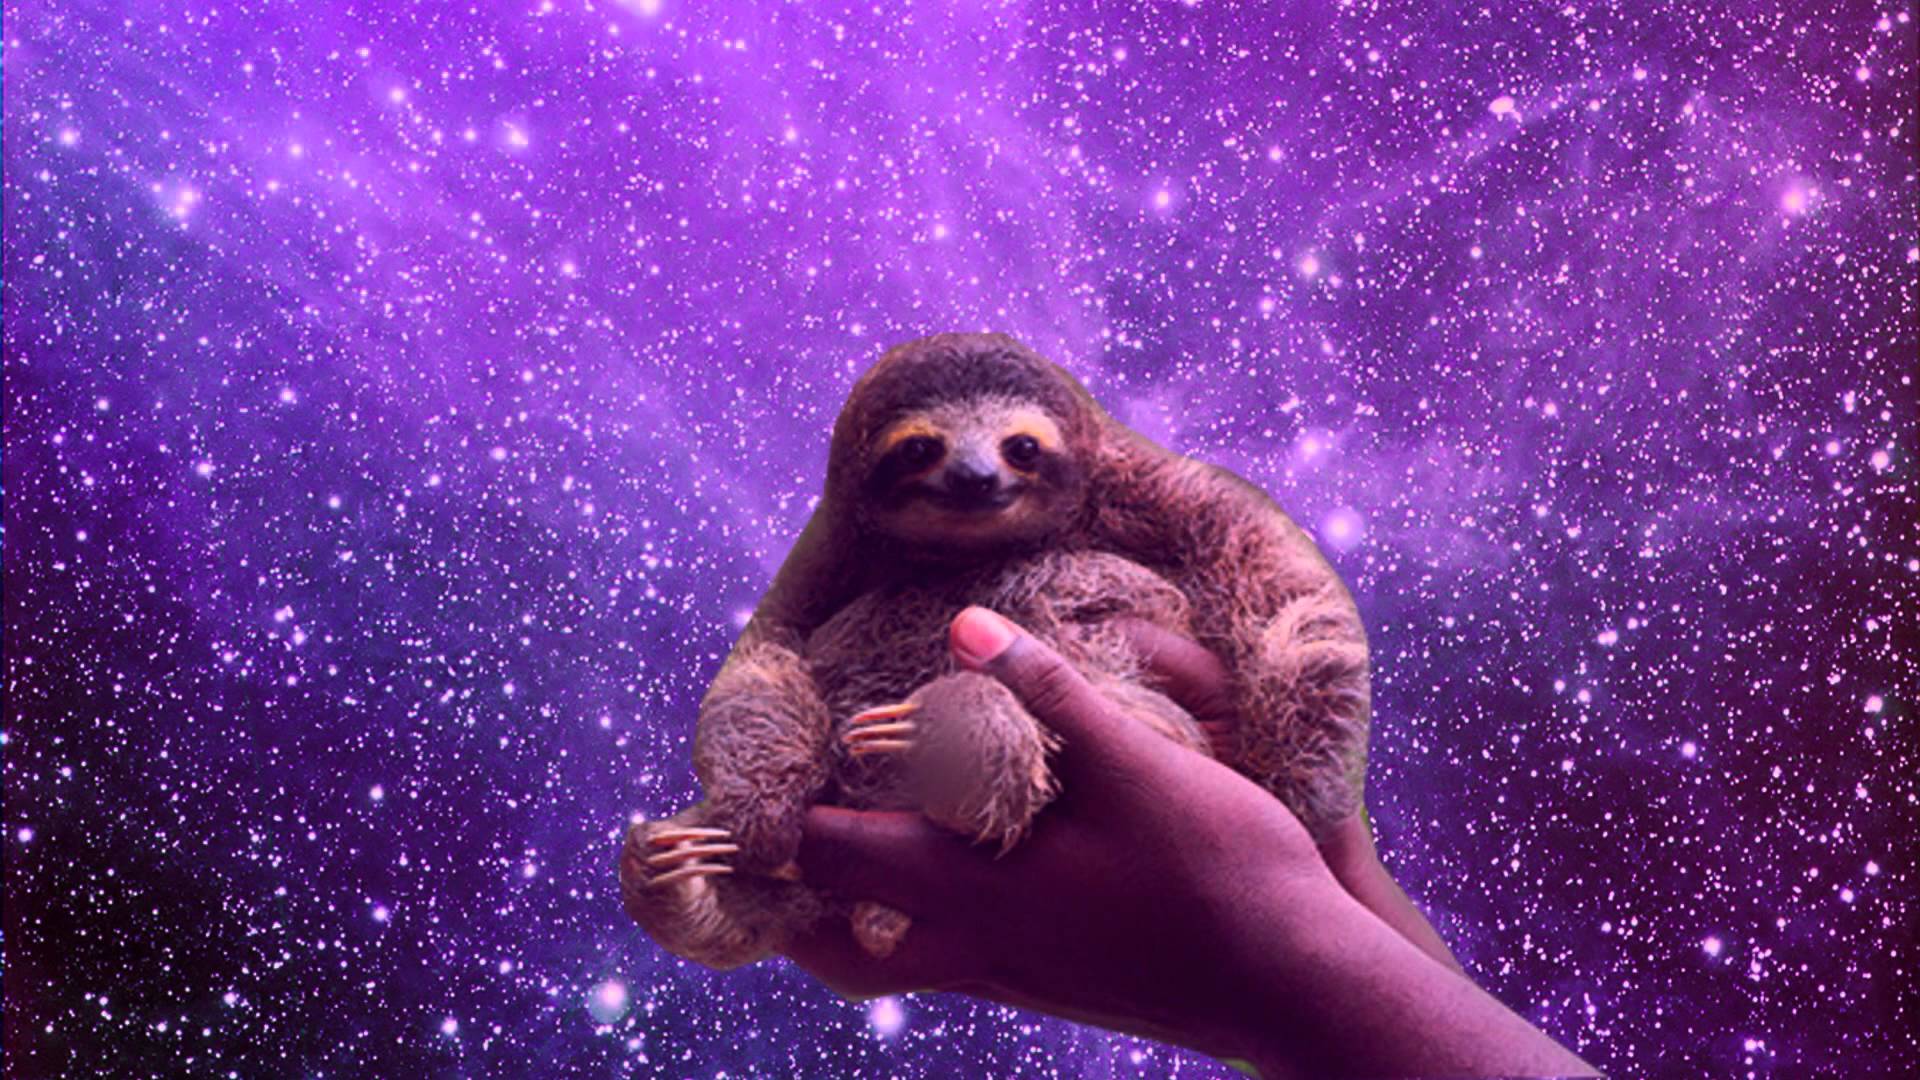 sloth wallpaper to fit my computer